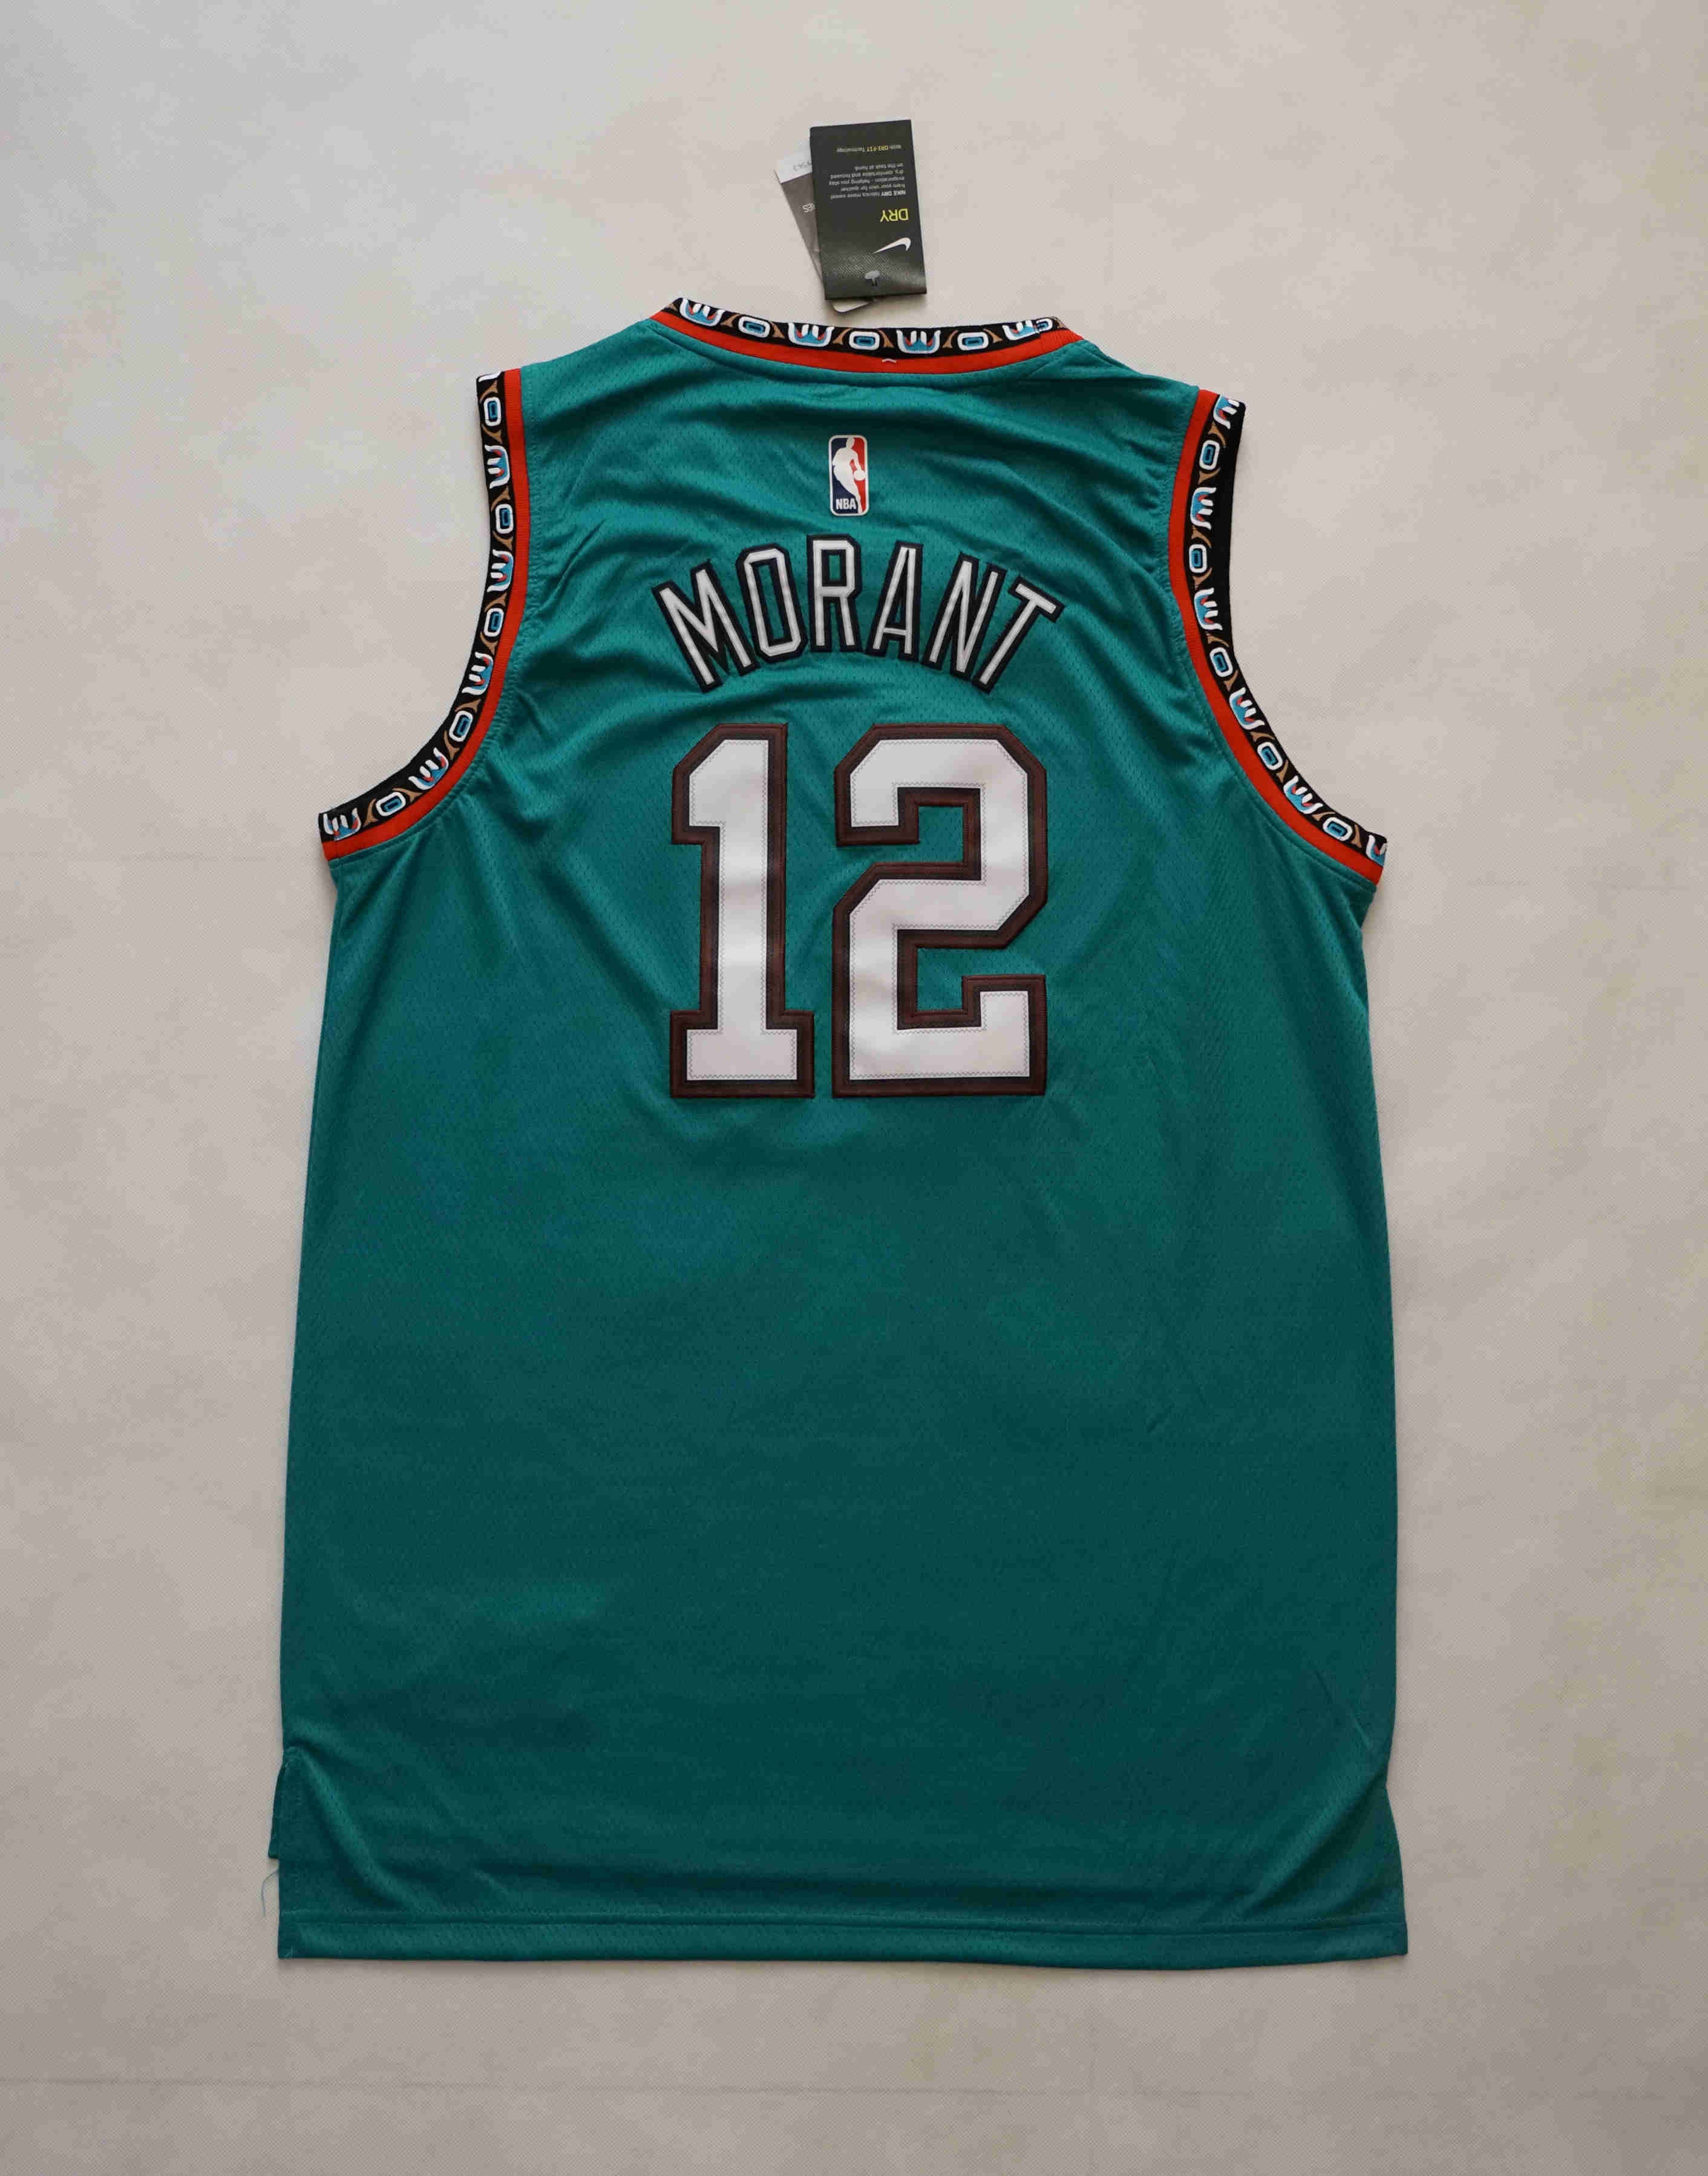 throwback vancouver grizzlies jersey